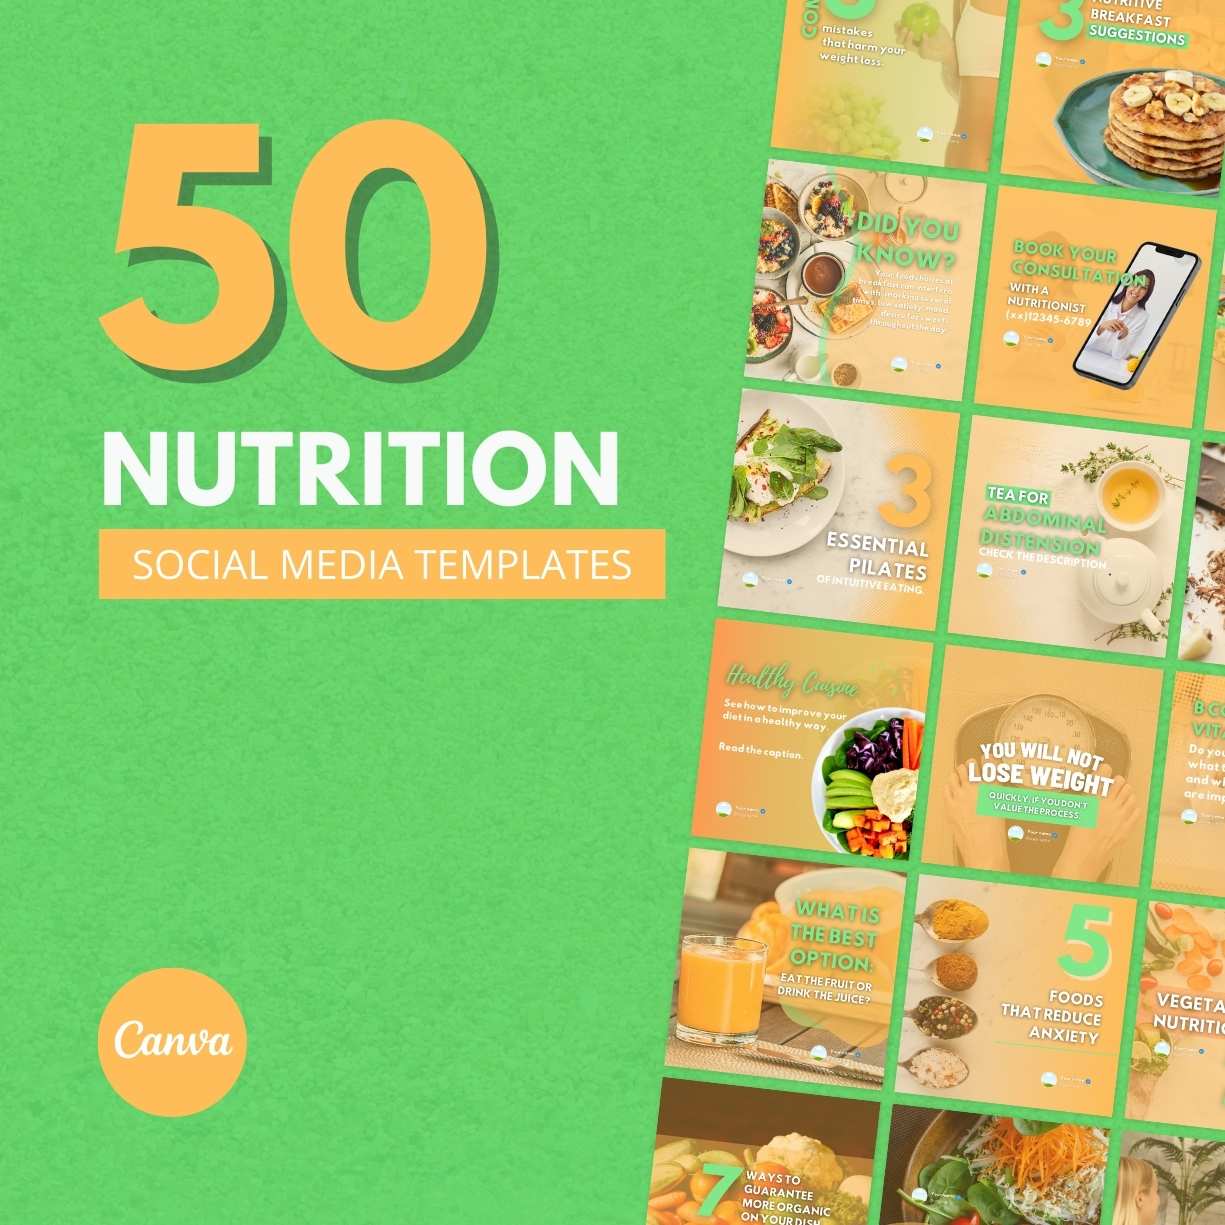 50 Nutrition Canva Templates For Social Media cover image.